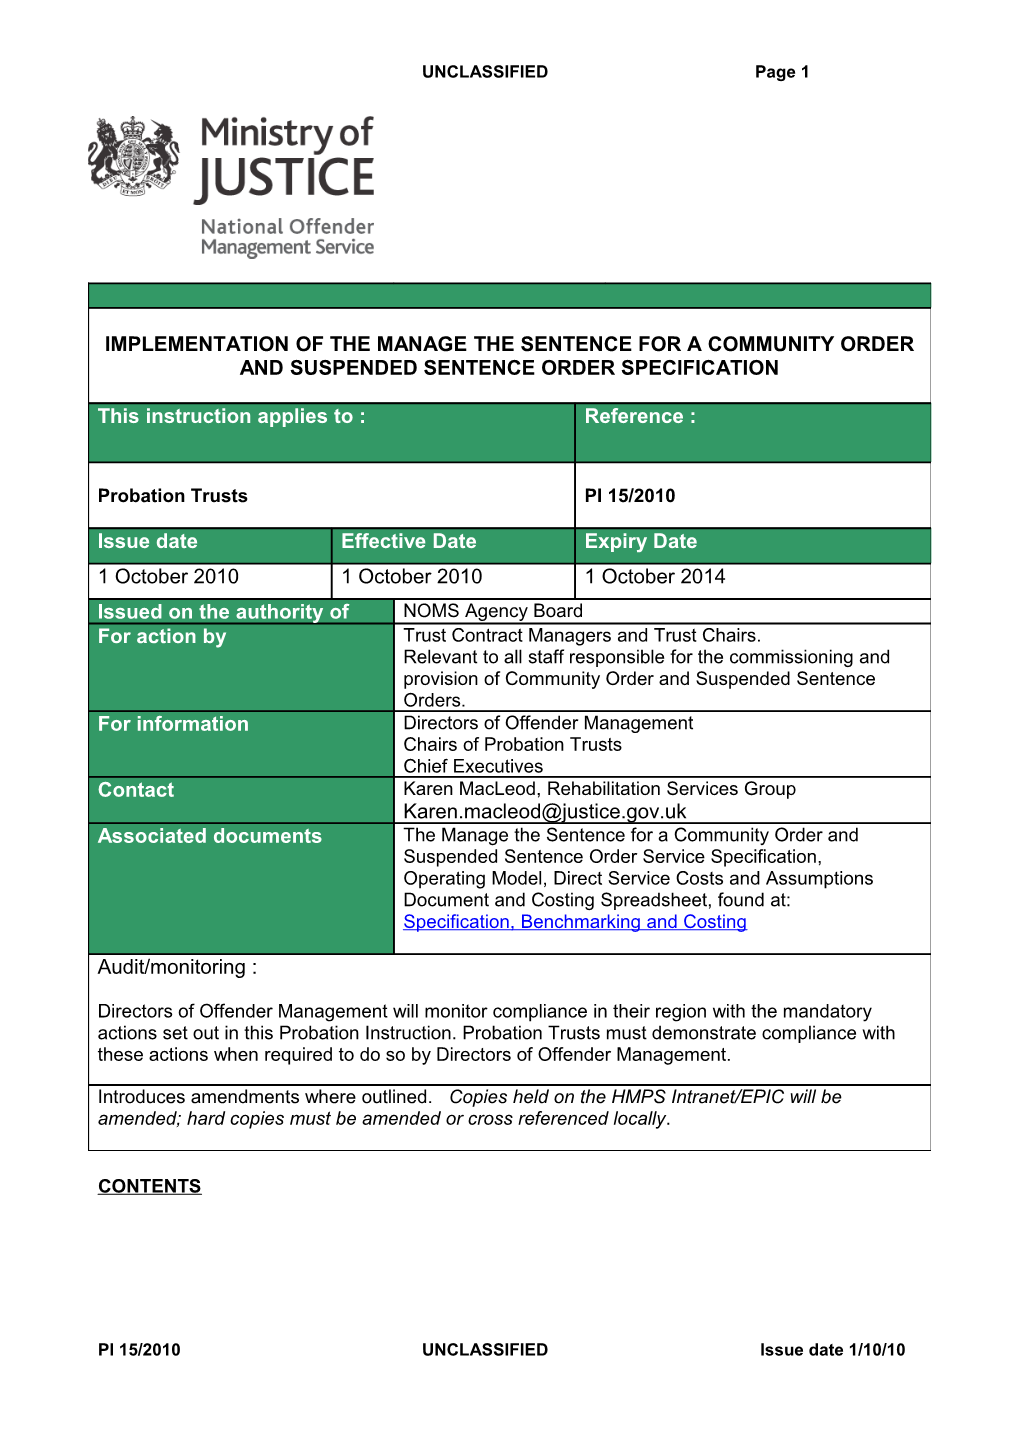 Probation Instruction 15-2010 - Implementation of the Victim Liaison Service Specification